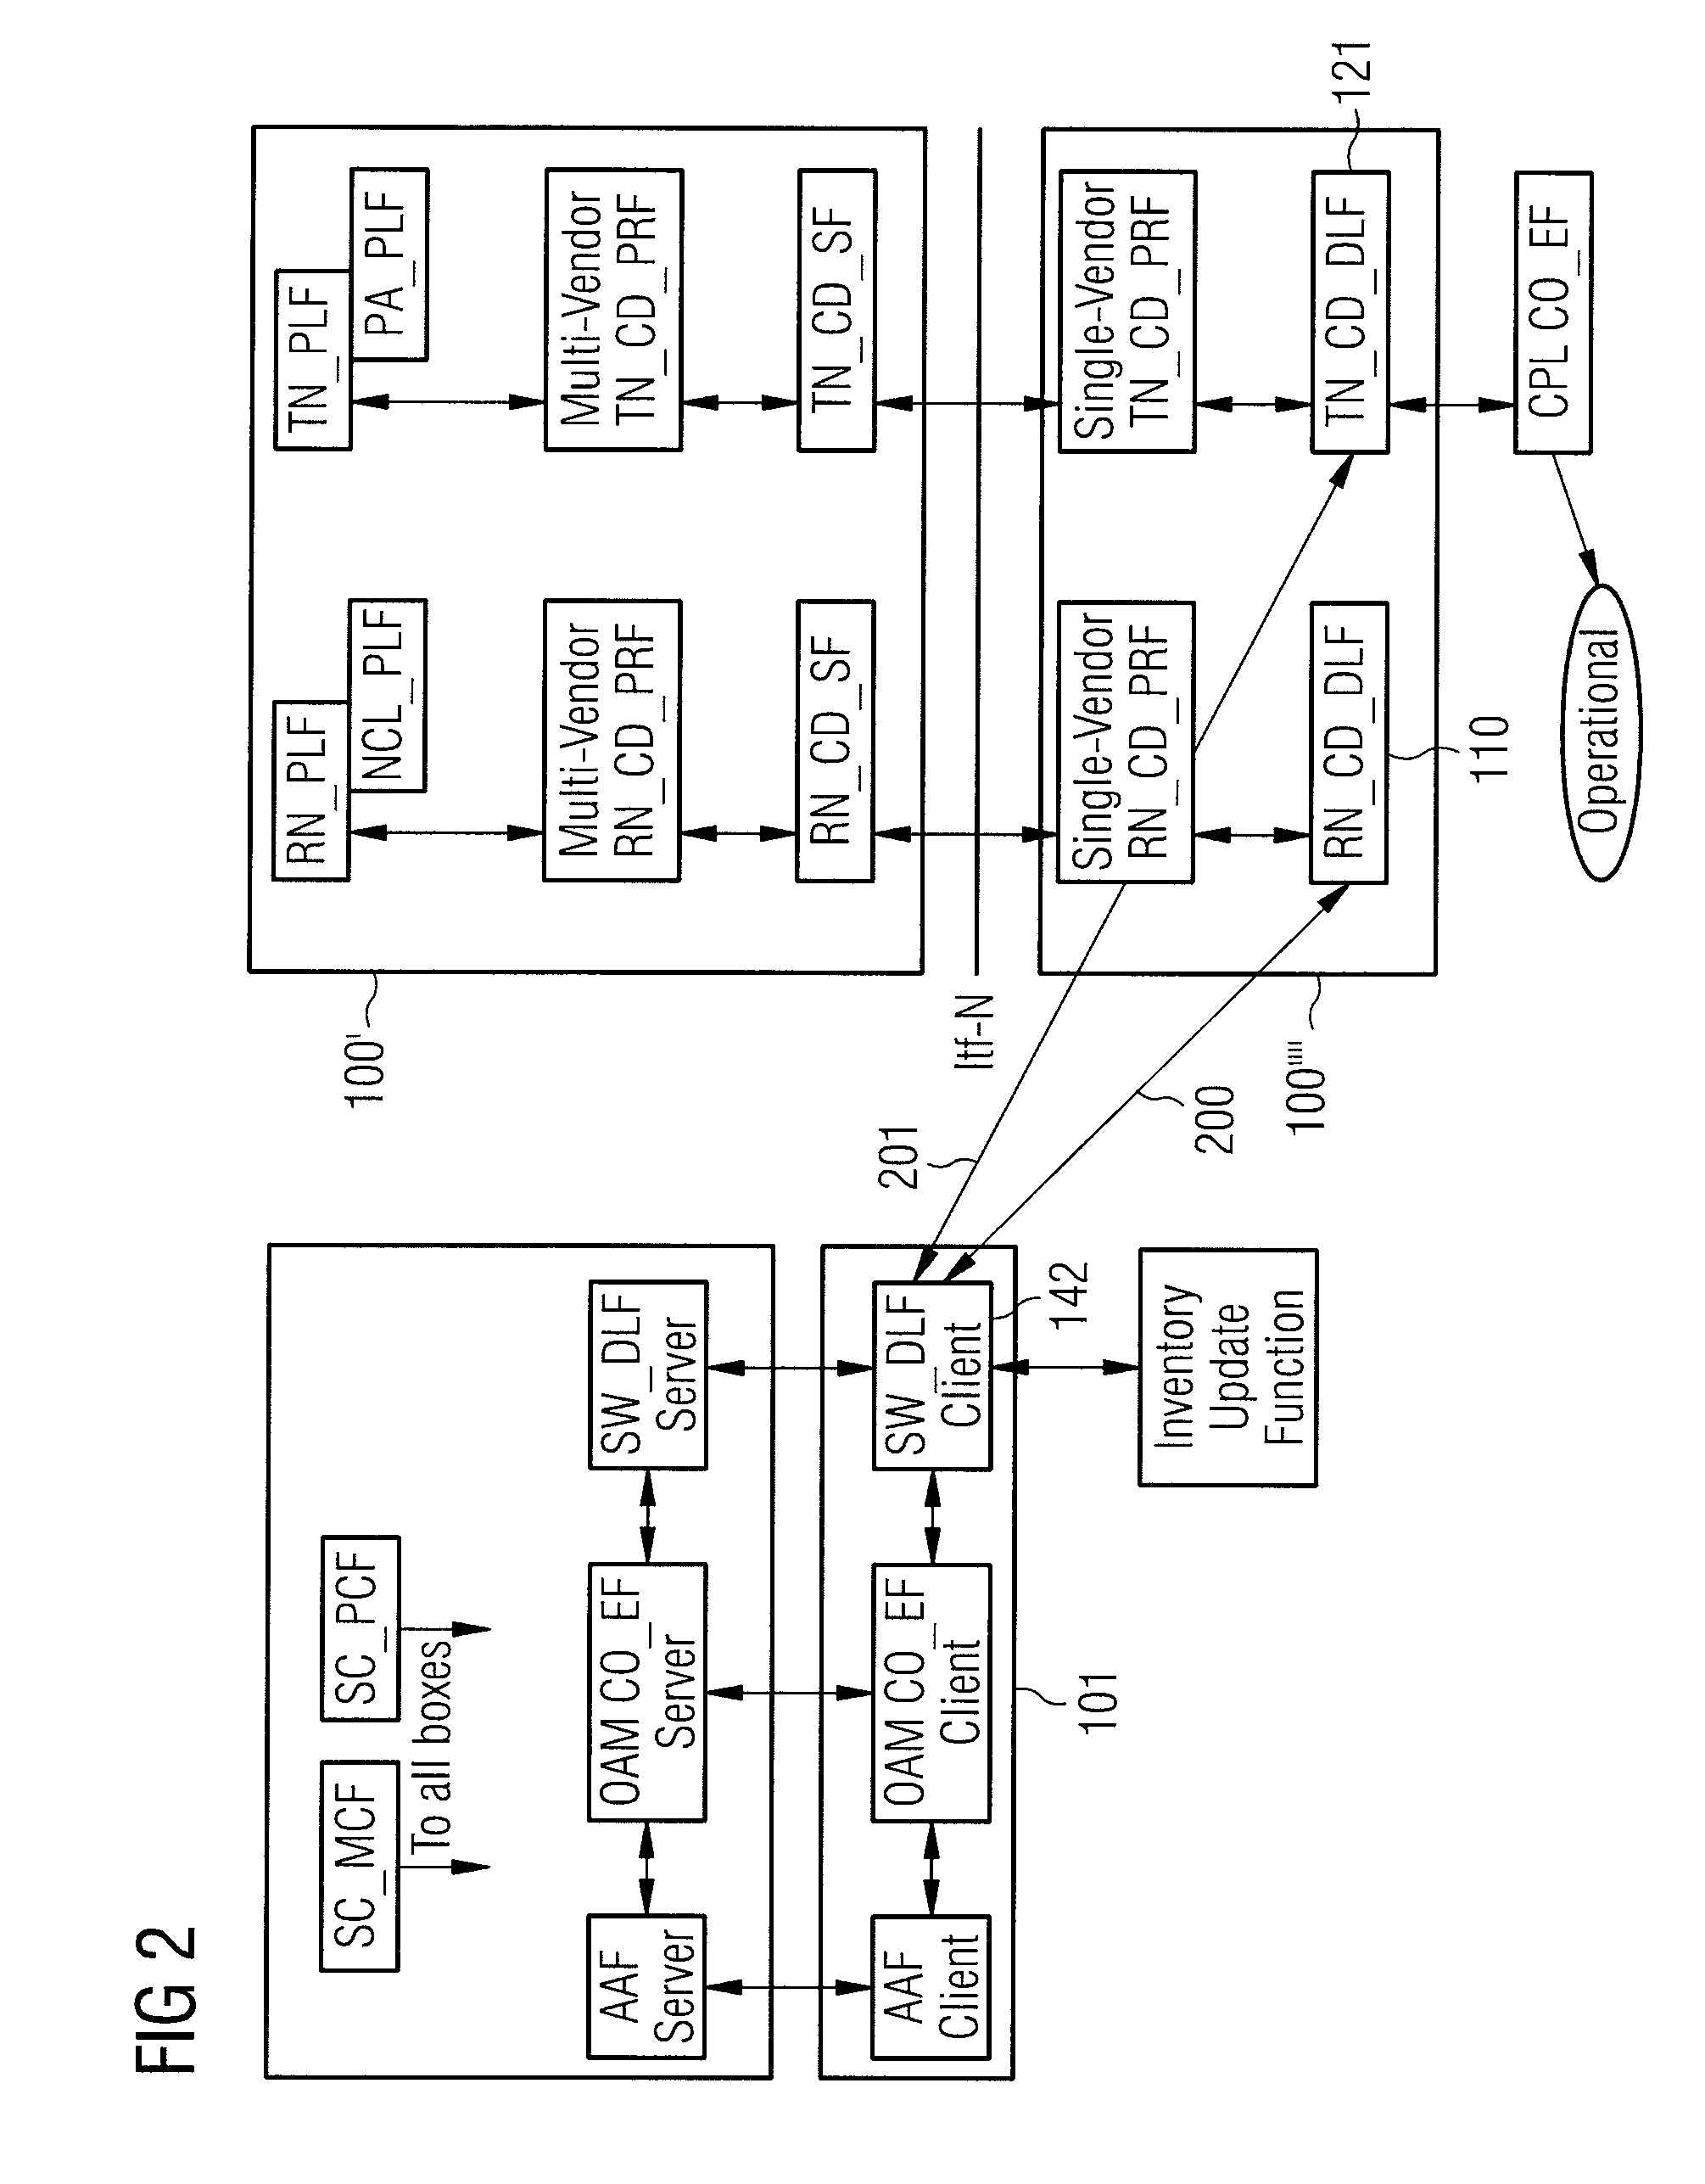 Integration apparatus, communication network and method for integrating a network node into a communication network